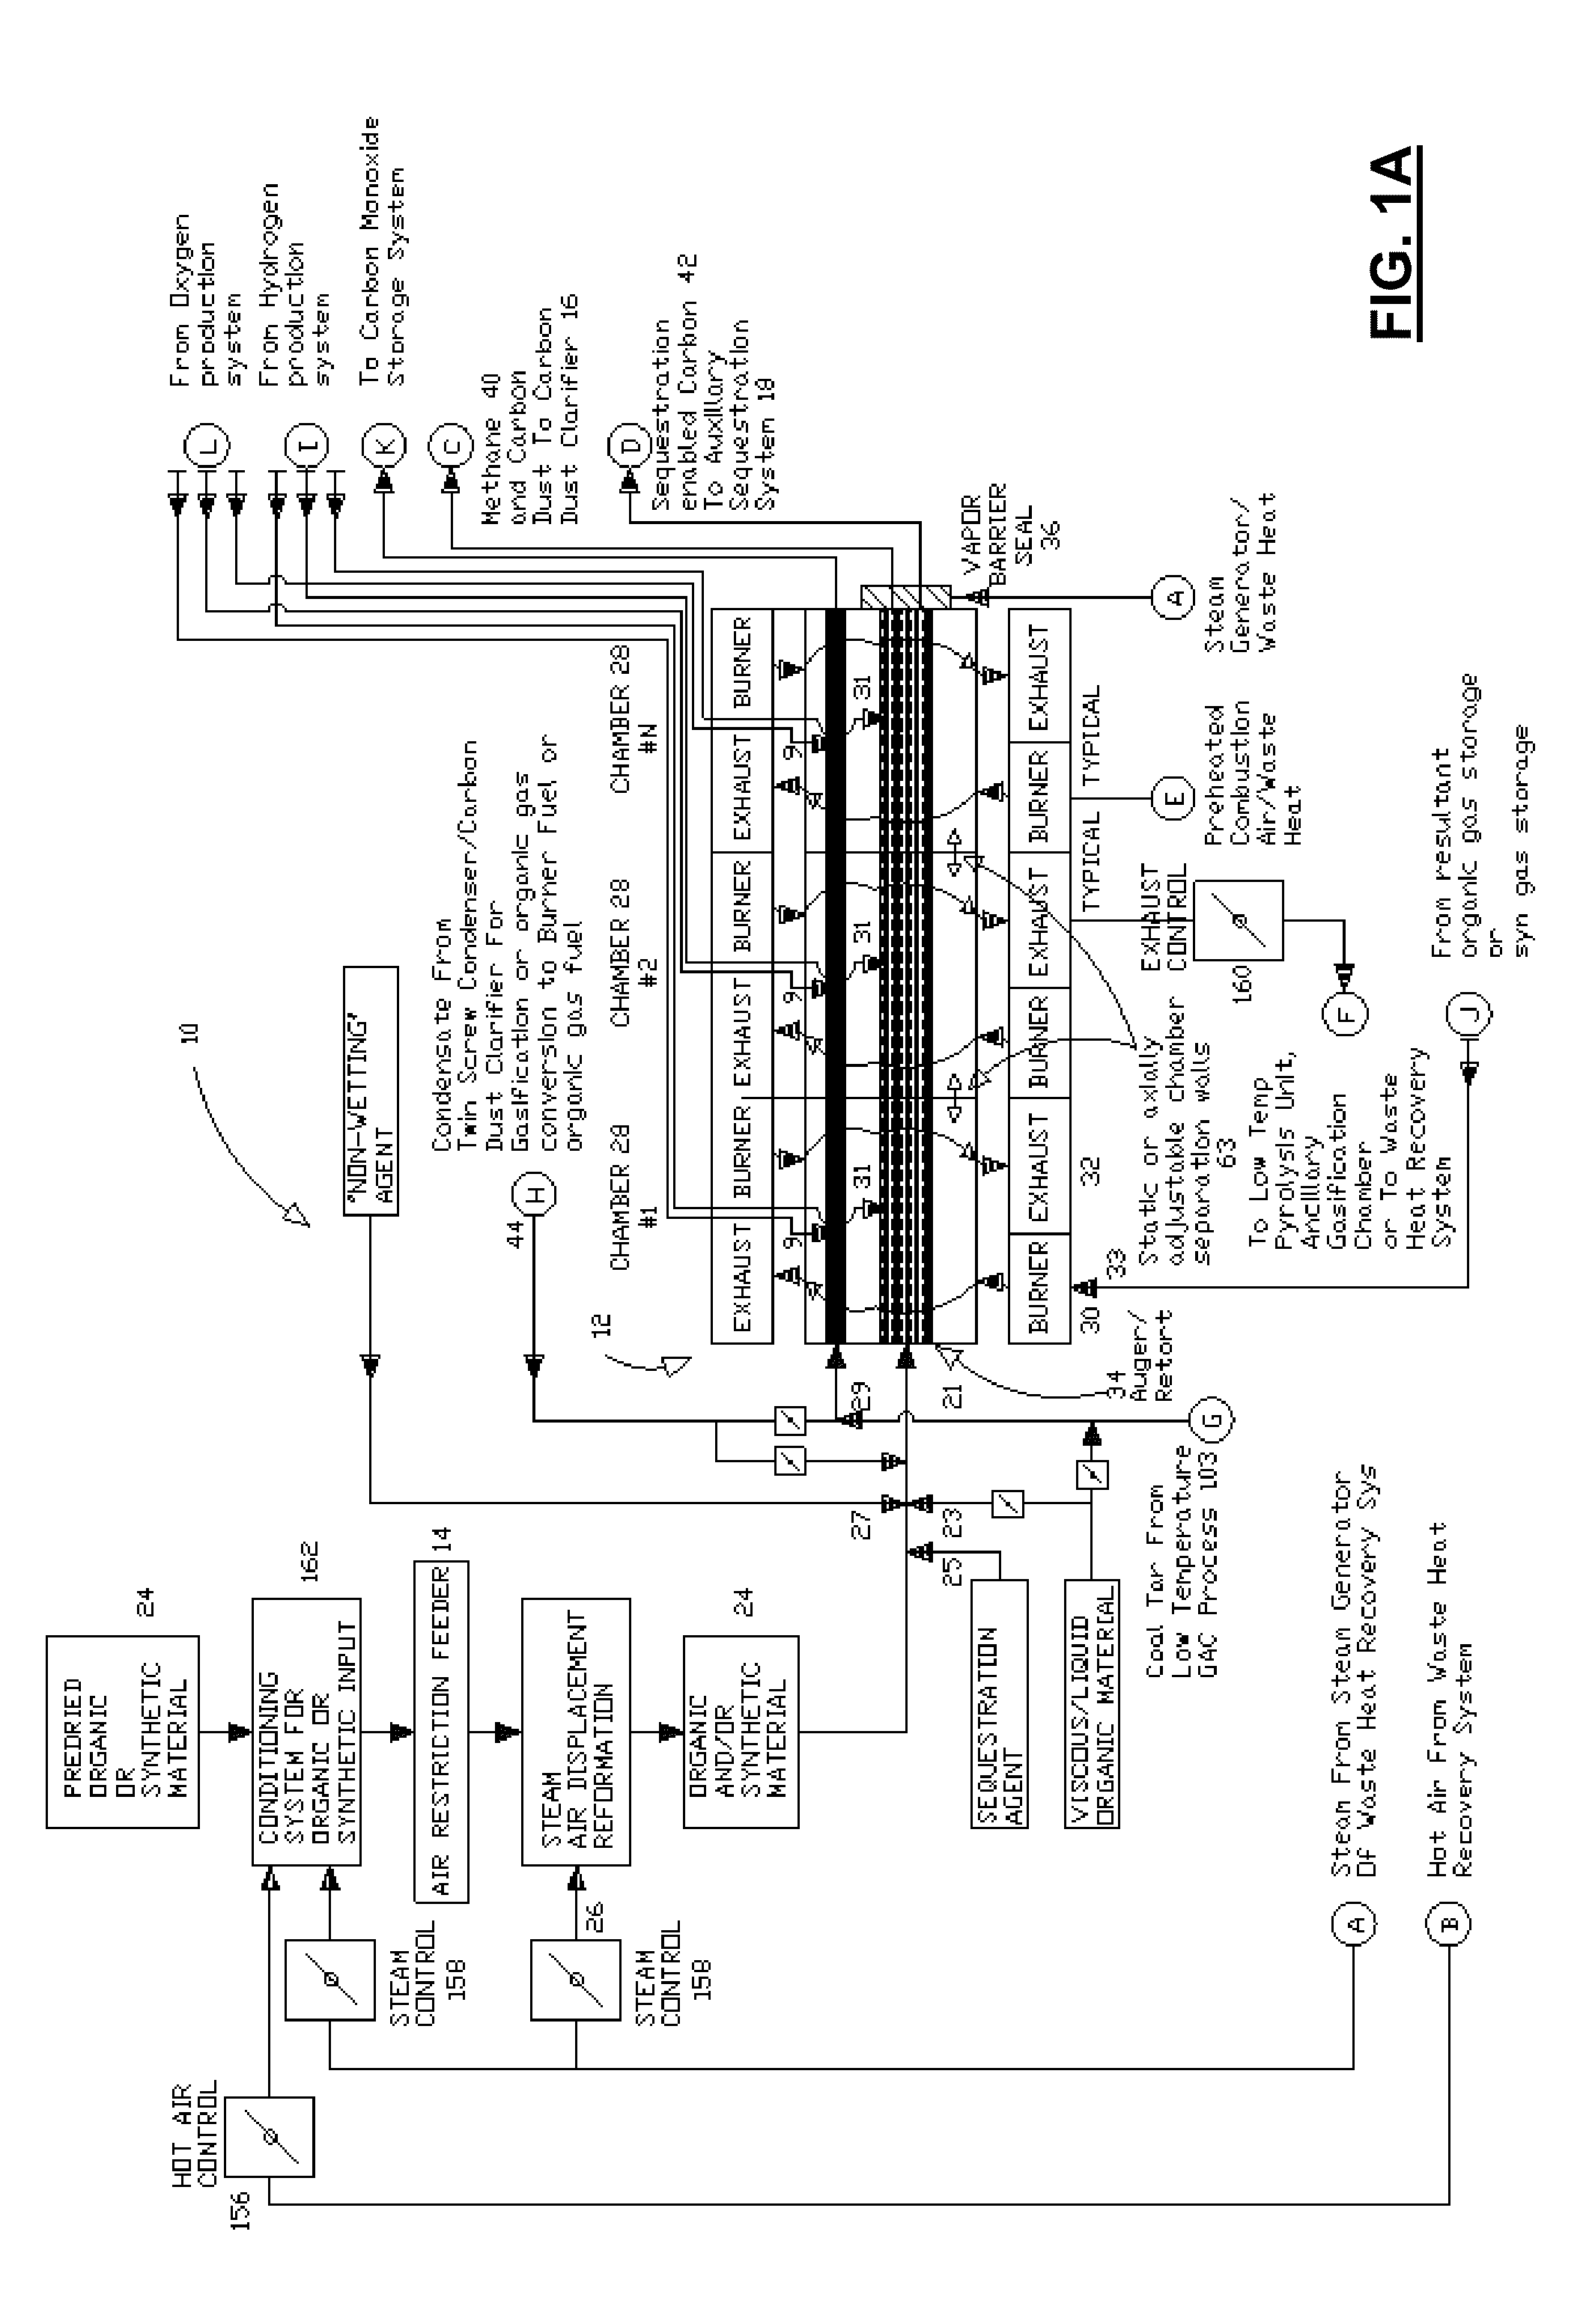 Pyrolysis and gasification systems, methods, and resultants derived therefrom